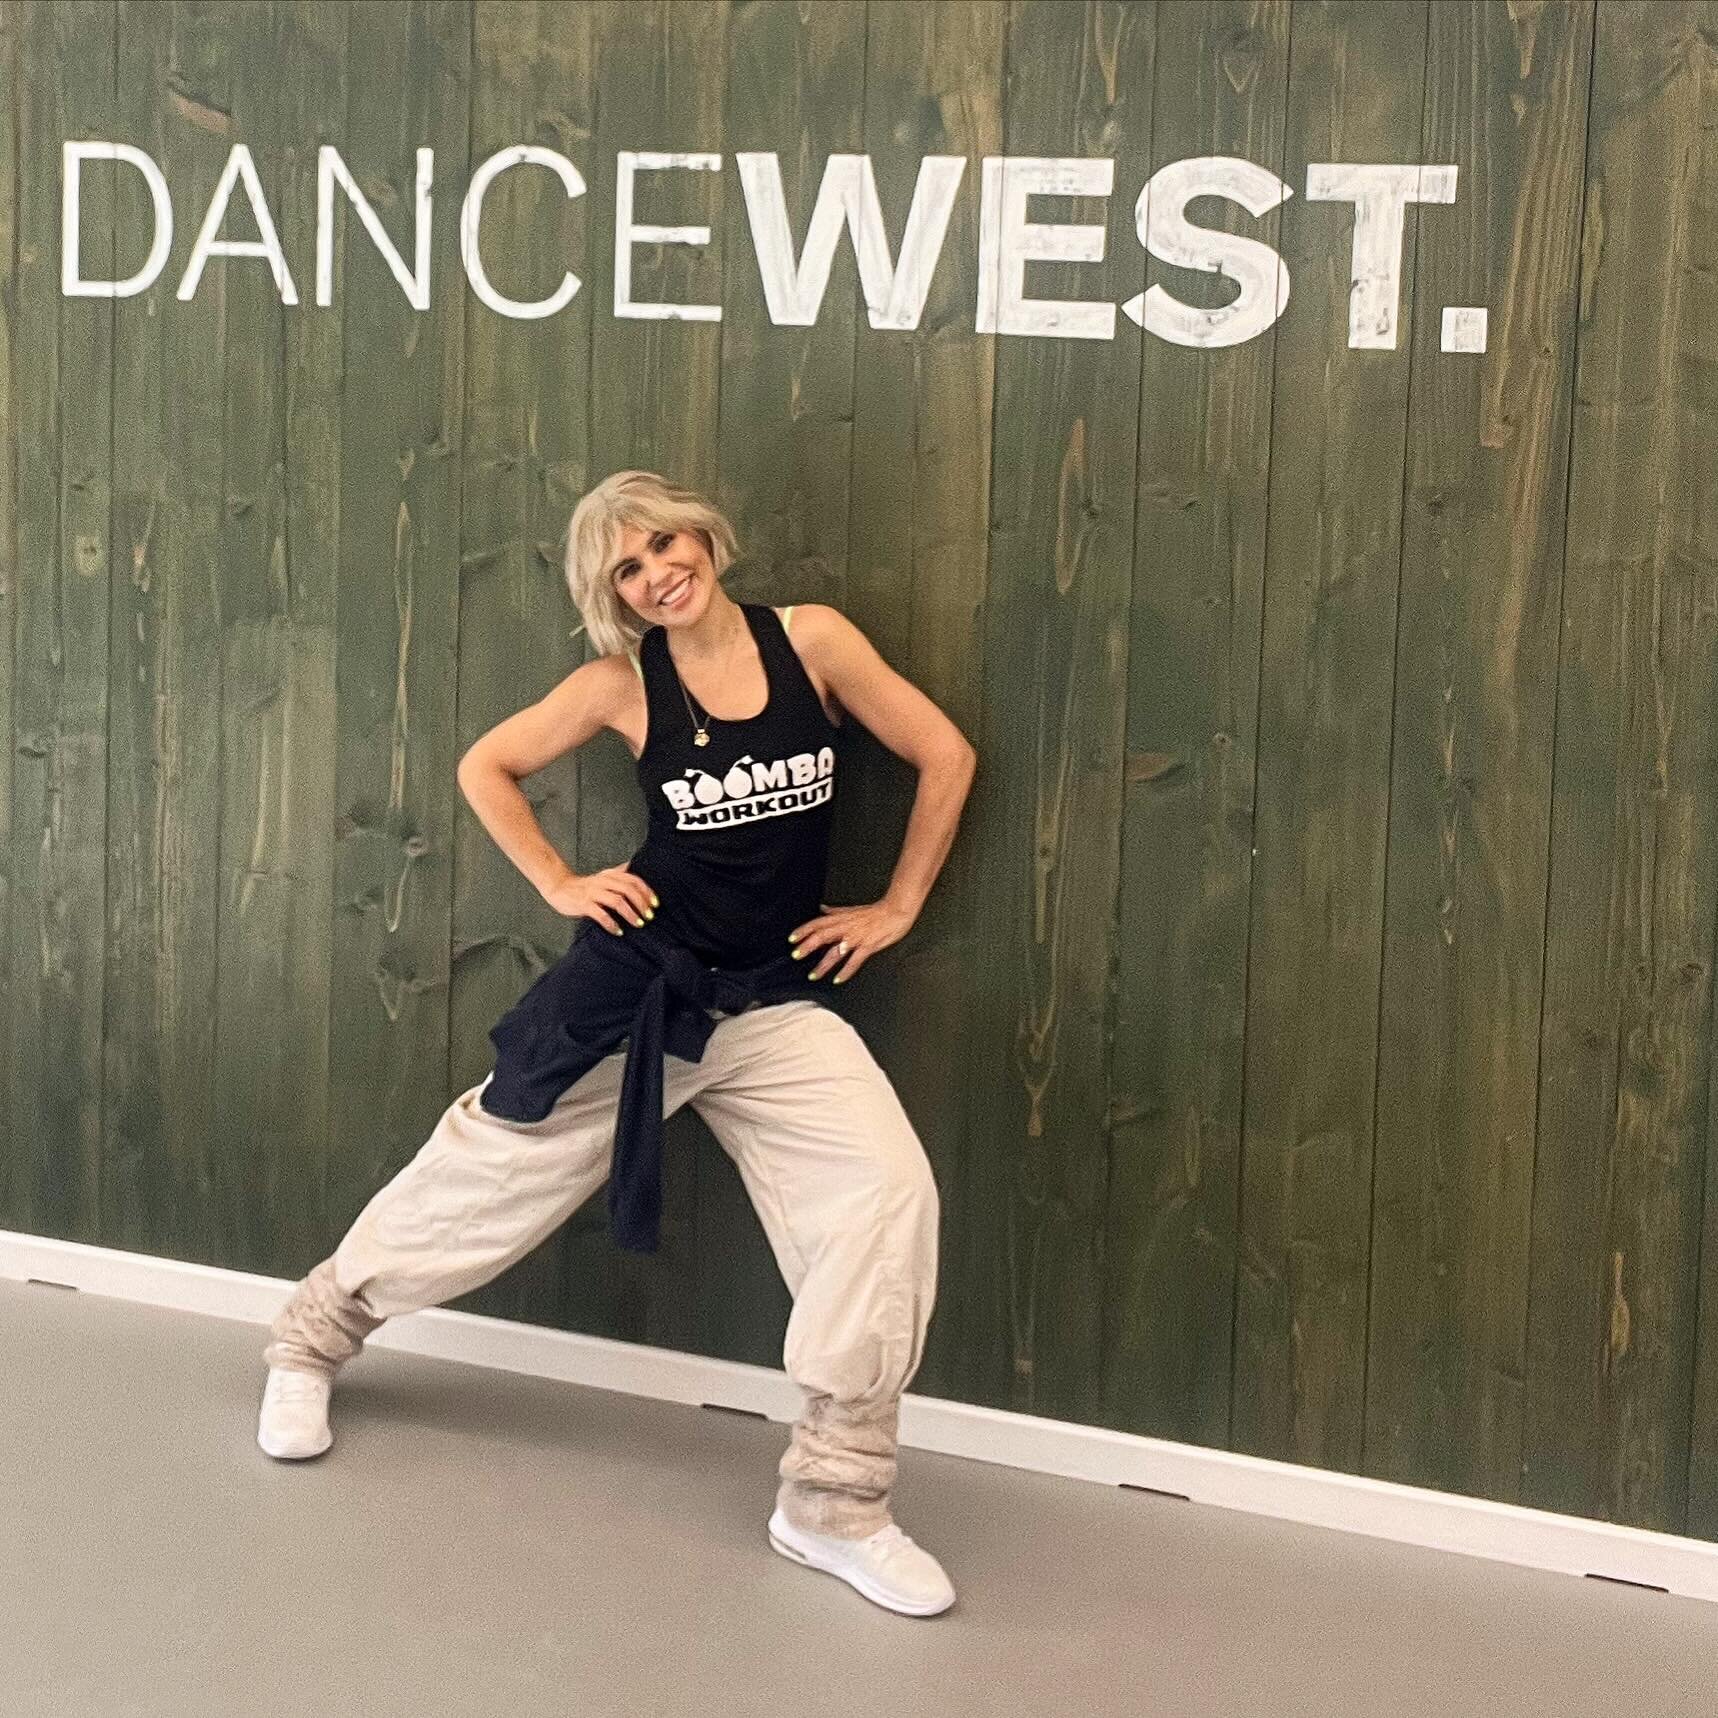 DON&rsquo;T MISS OUT ON OUR FIRST CLASS PROMOTION! BOOMBAWORKOUT STARTS THE 2nd MARCH AT 10am AT DANCEWEST STUDIO (NEAREST TUBE STN. PARSONS GREEN) CLAIM YOUR 50% OFF WITH CODE: BOOMBAGYM50 WHEN YOU BOOK AT WWW.BOOMBAGYM.COM